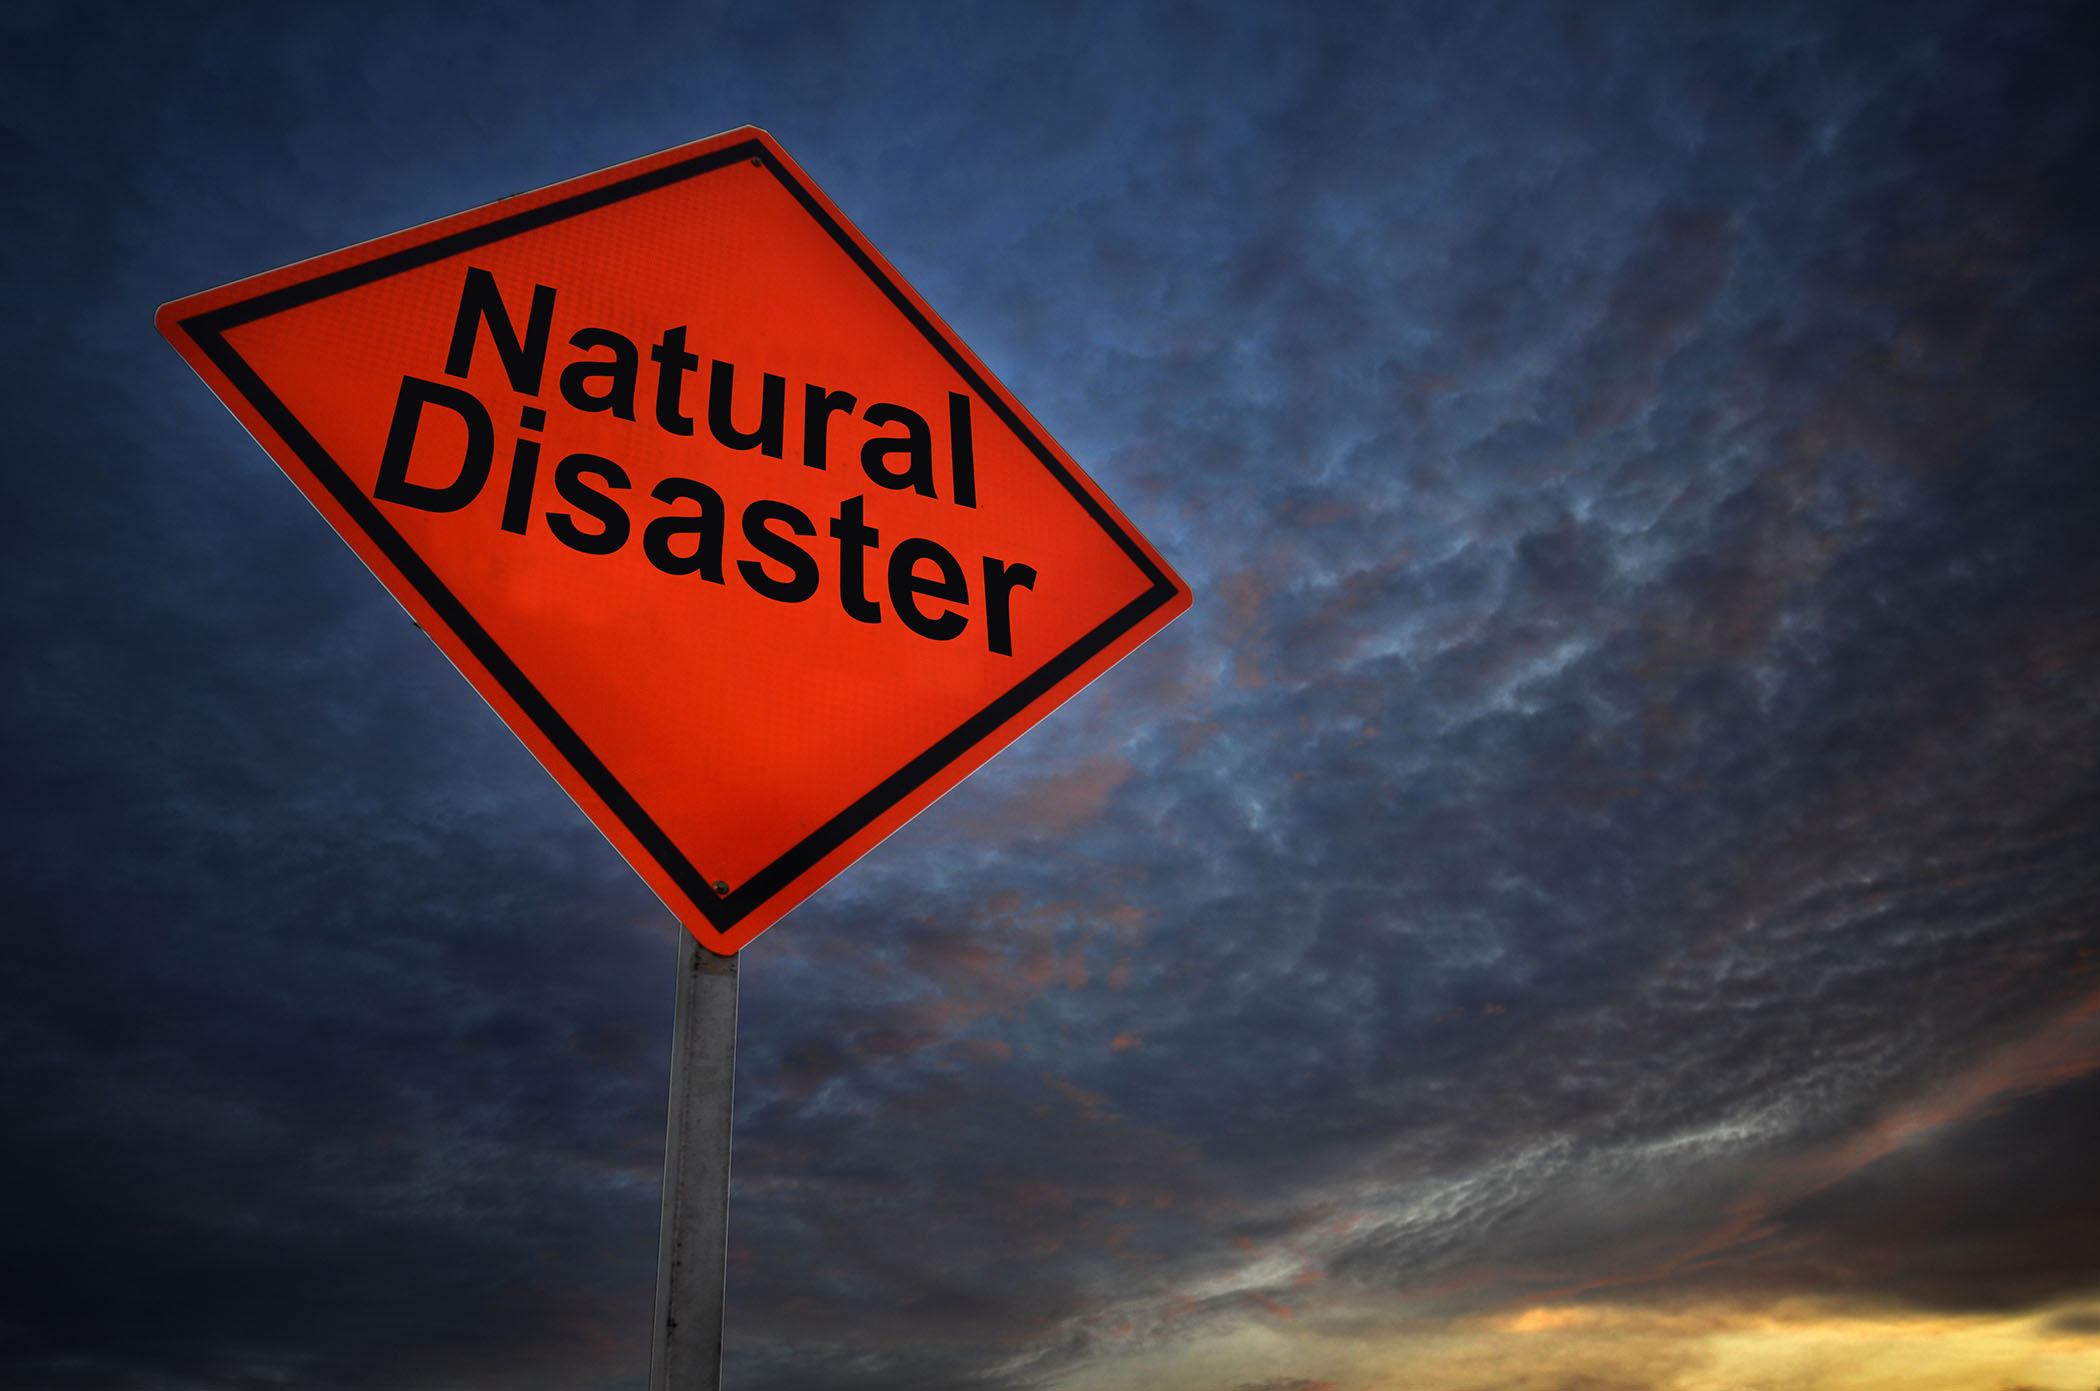 road sign that says Natural disaster against a stormy sky